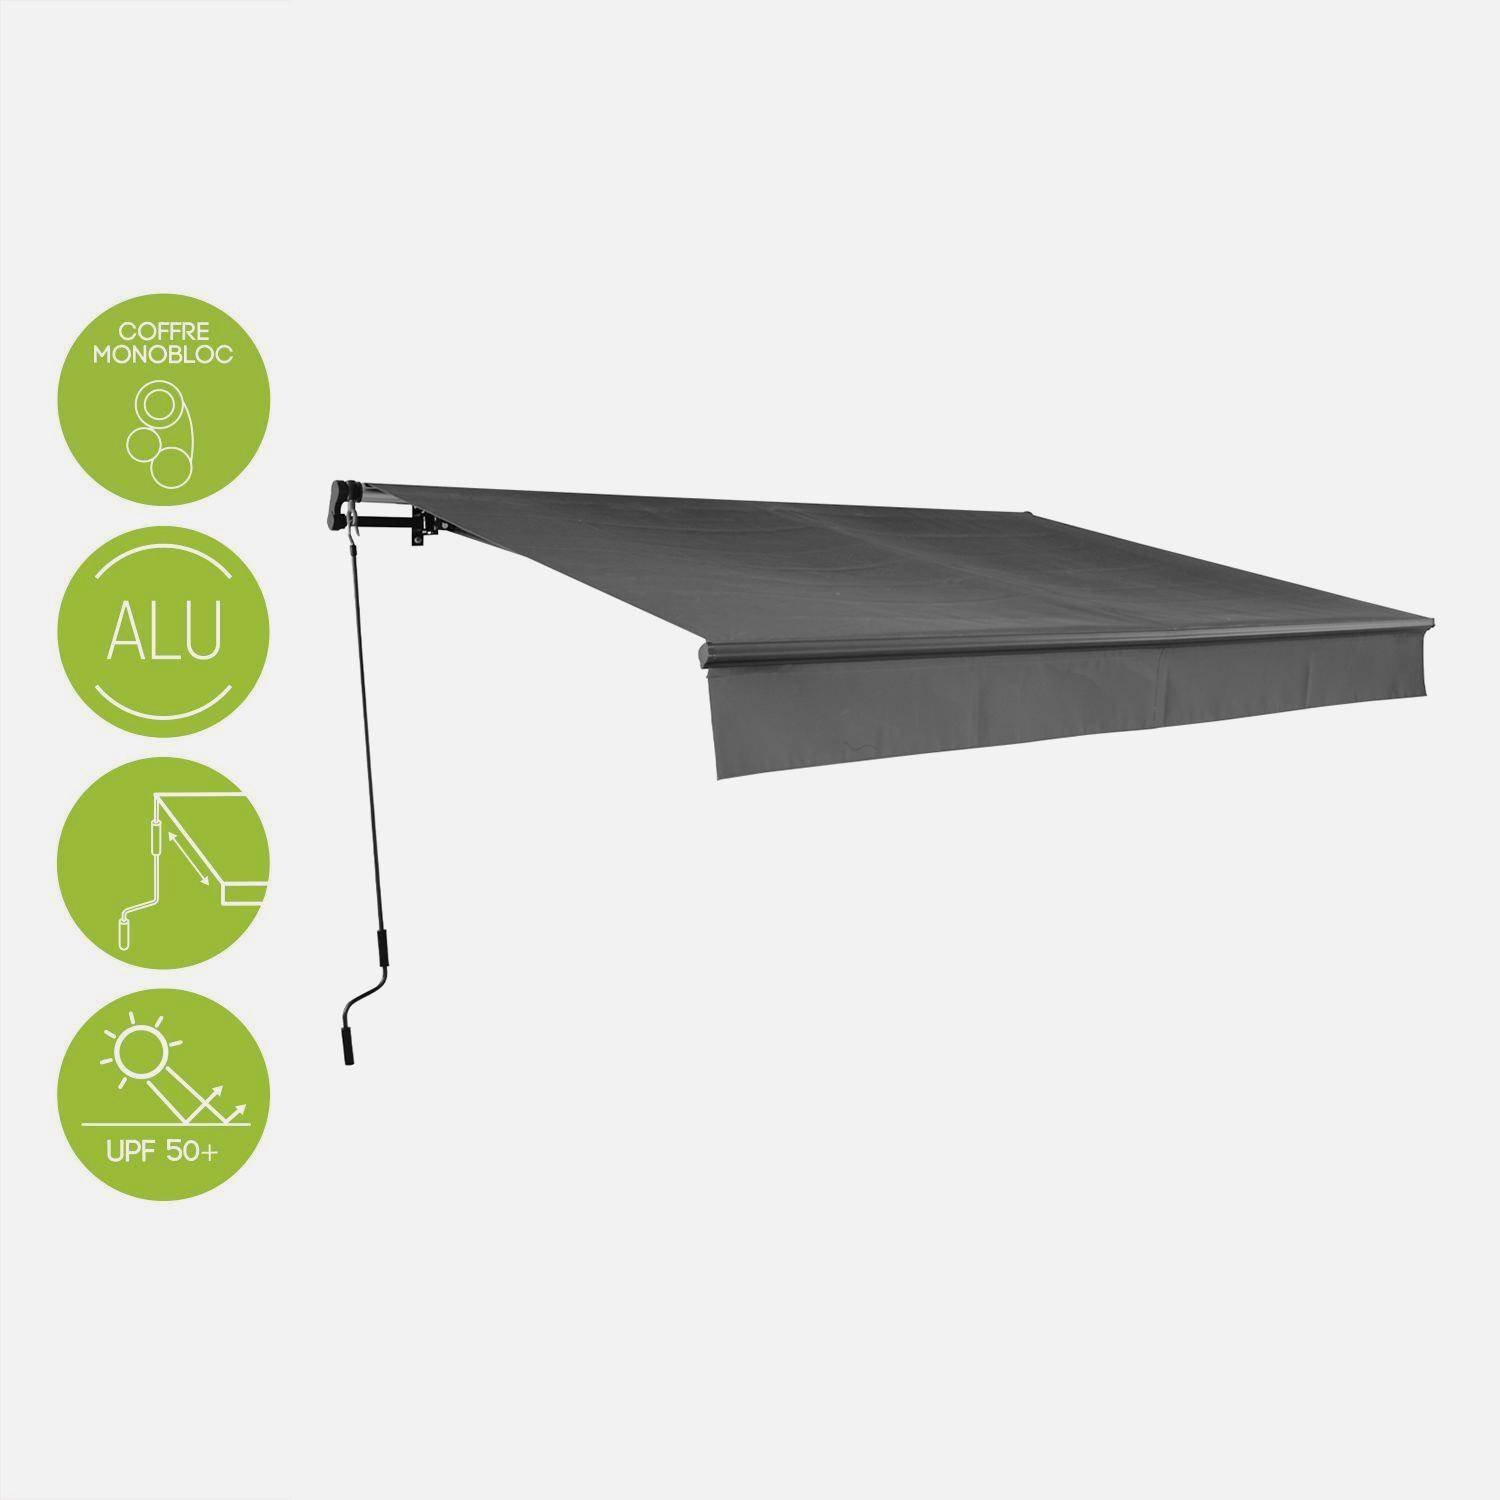 Retractable Patio Awning - wall awning, aluminium structure, manual system, coated polyester fabric - Alombra 3x2m - Grey,sweeek,Photo1